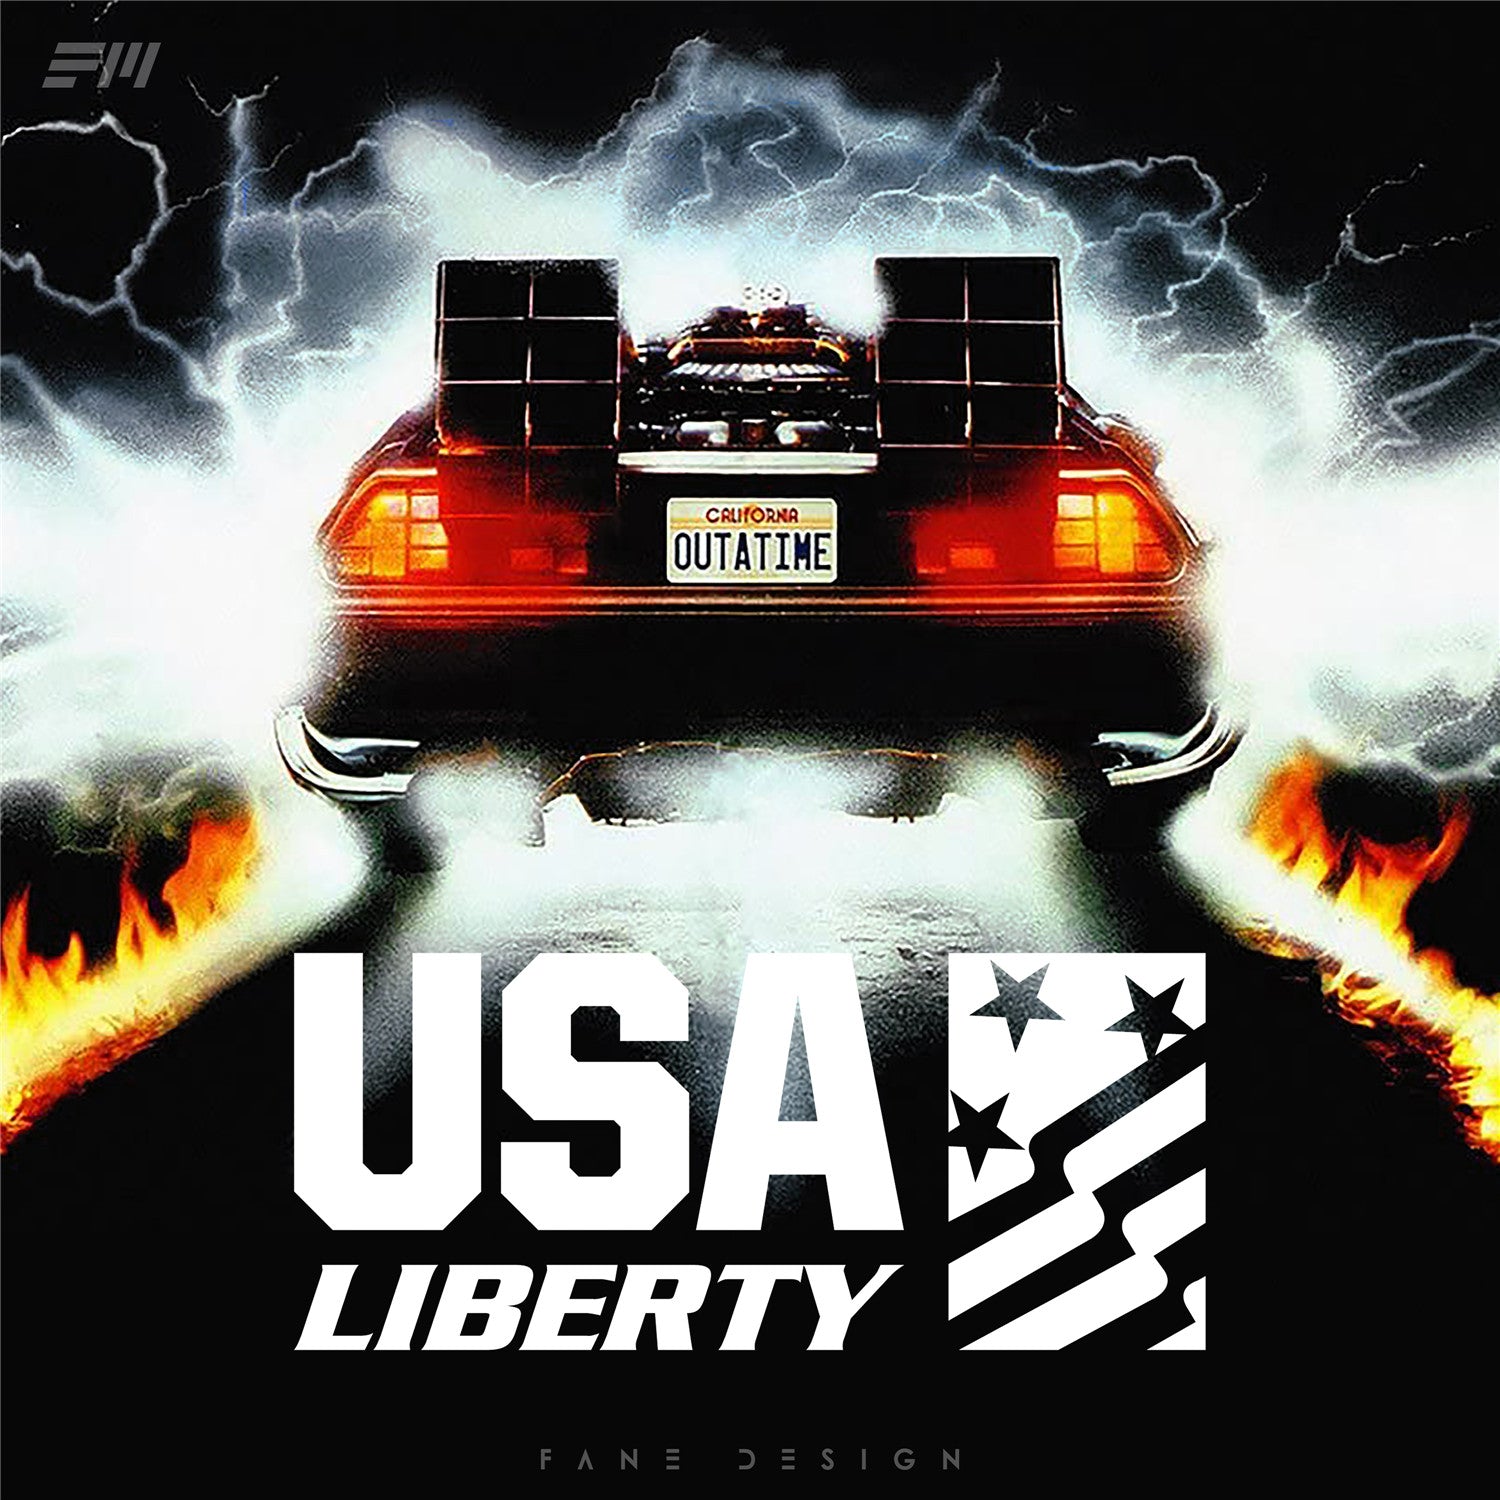 1/64 Scale 3D Graffiti License Plate USA Liberty SUS 304 Stainless Steel - 164model